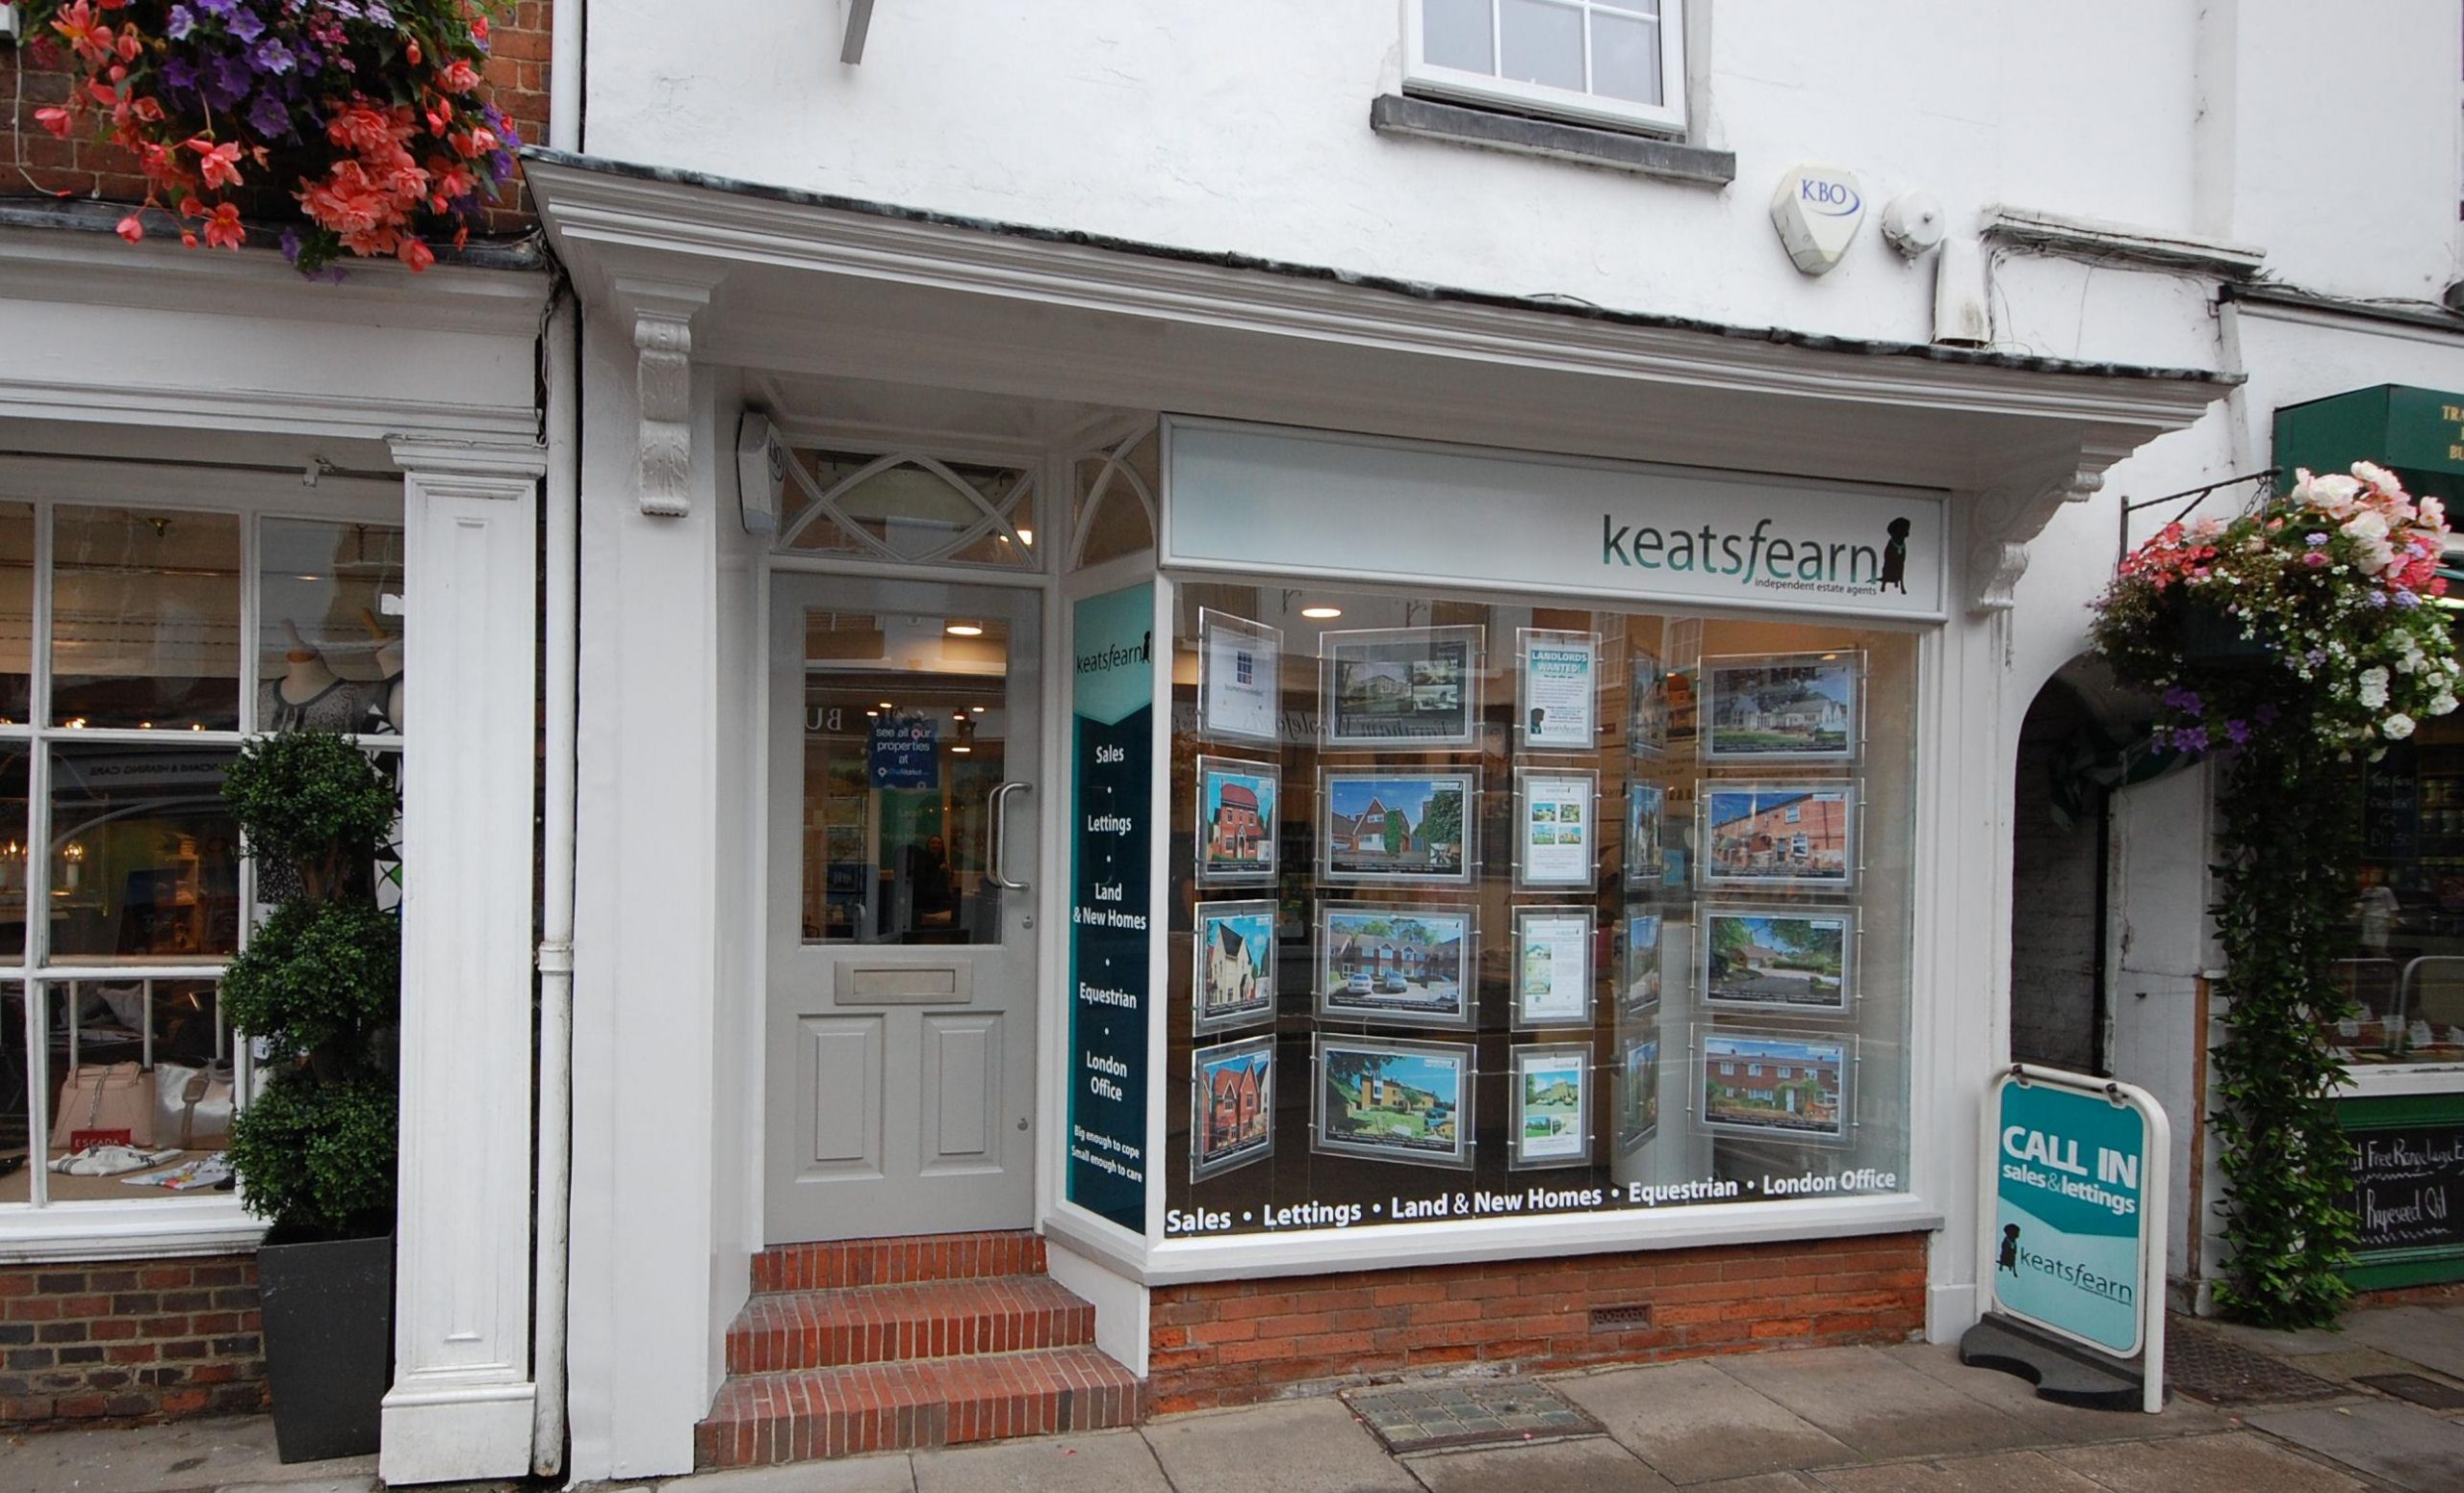 SALES/LETTINGS NEGOTIATOR WANTED